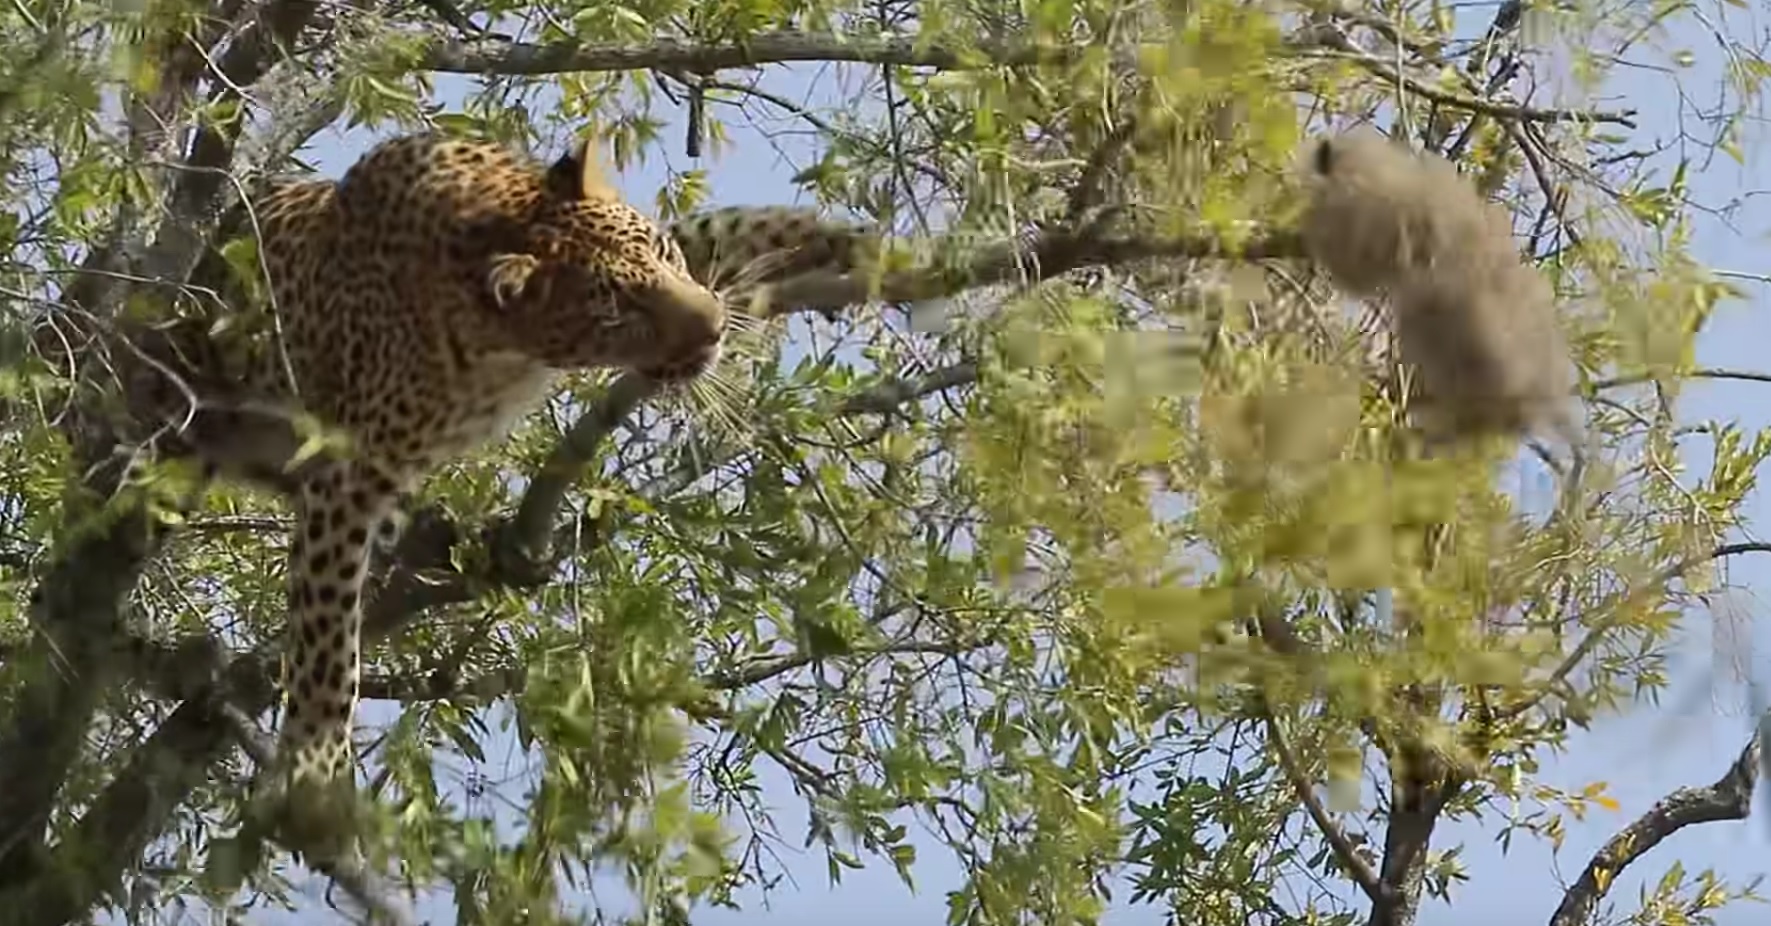 Leopard Tries To Shake Monkey From Tree